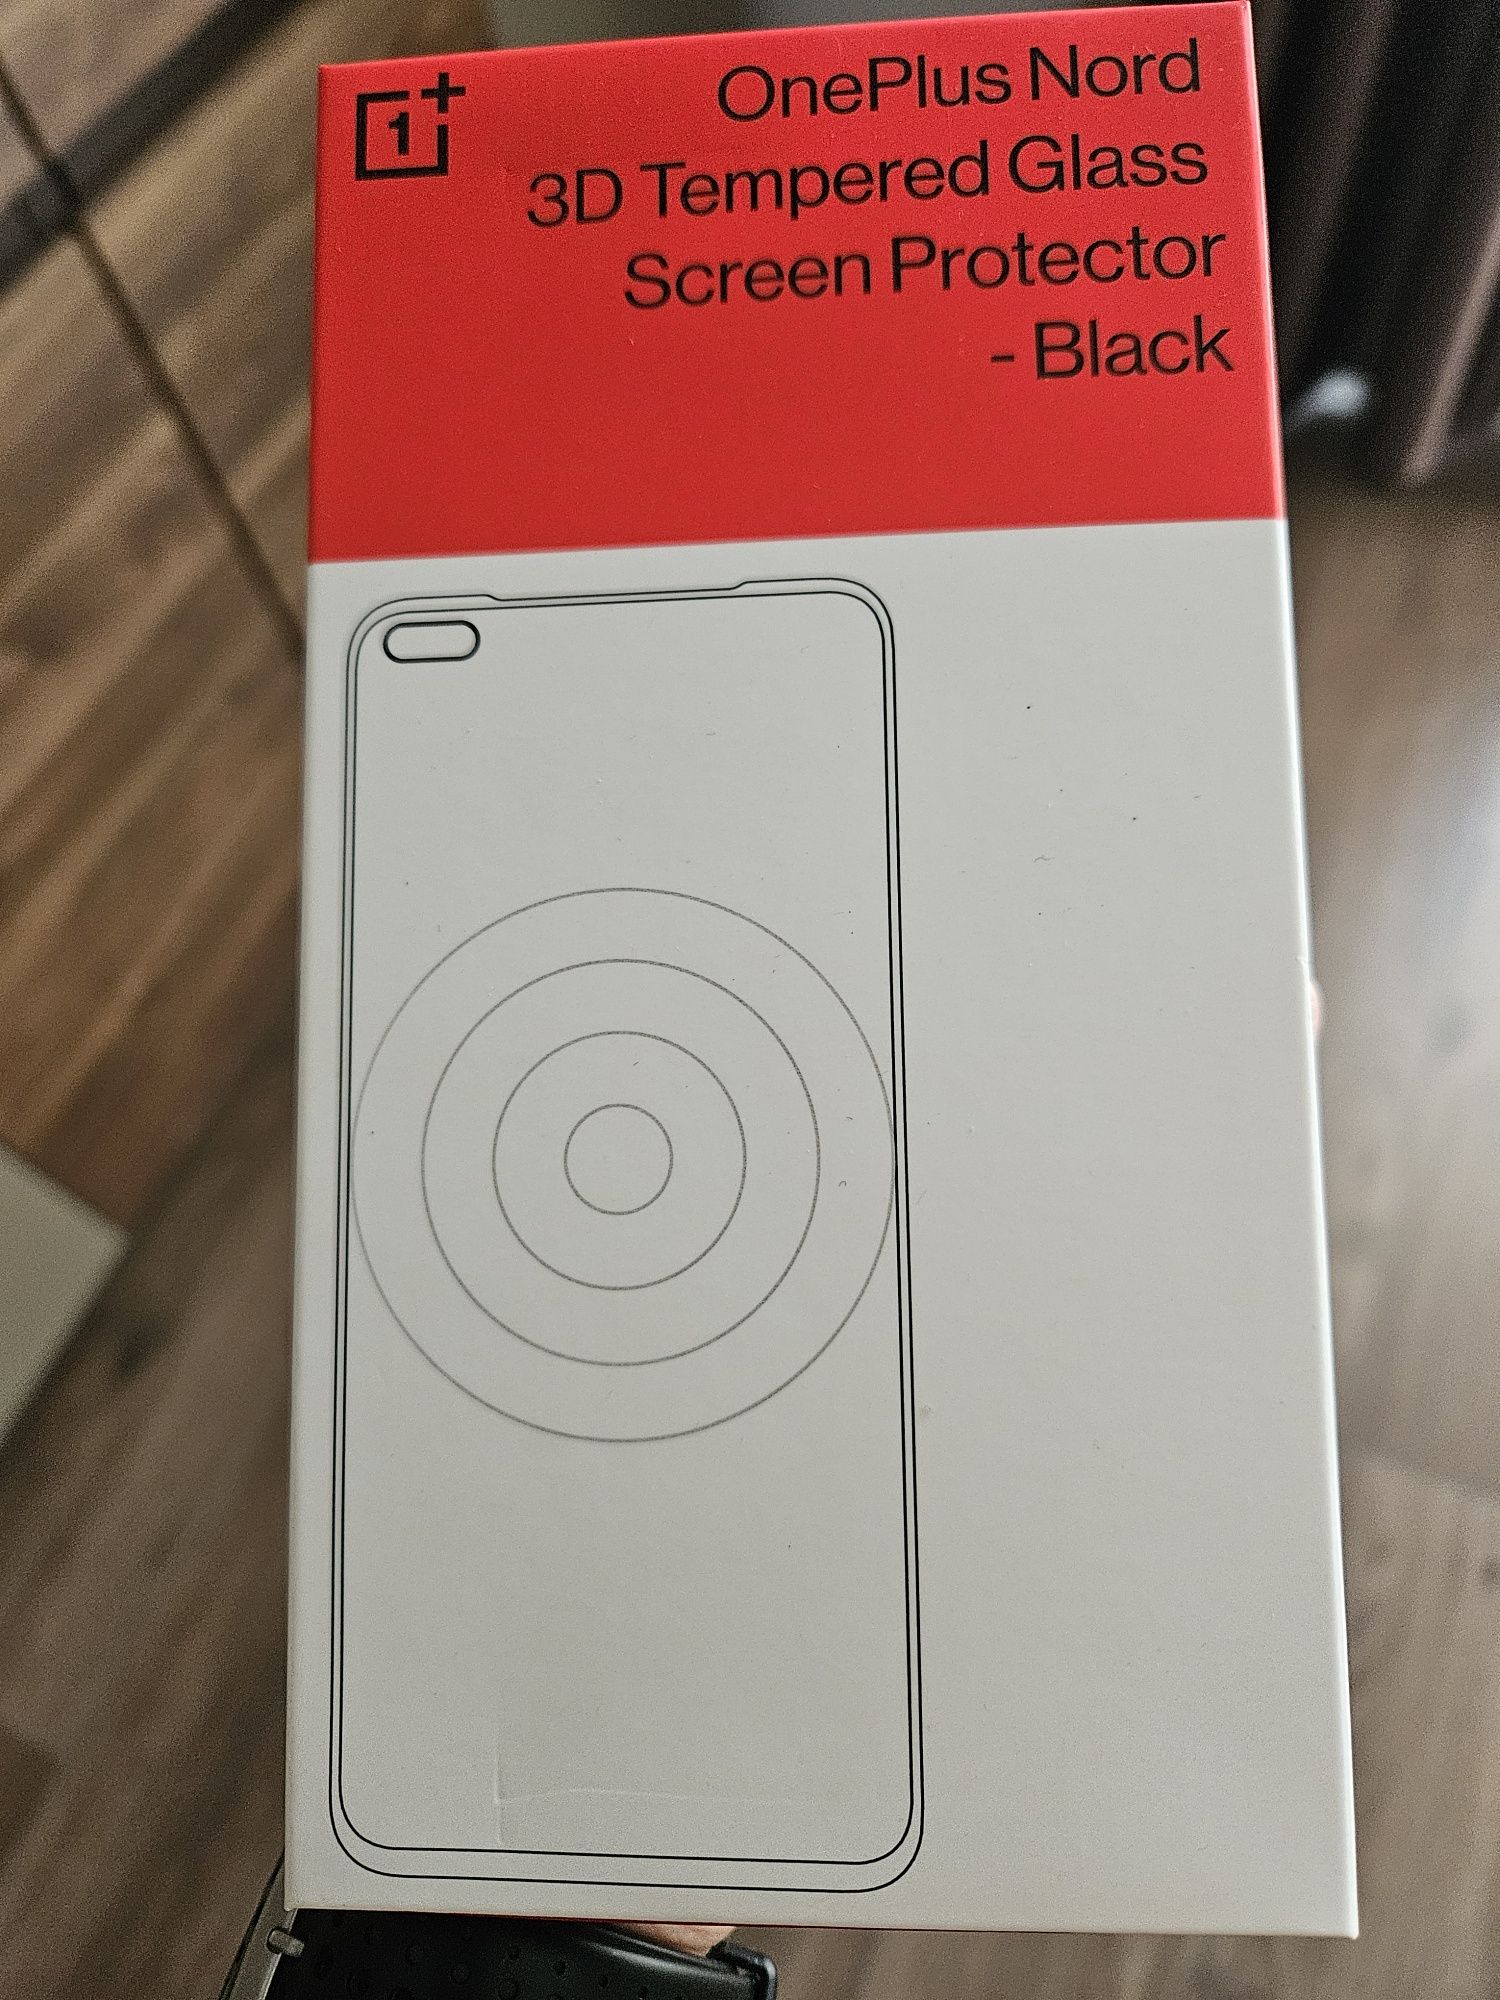 OnePlus Nord 3D Tempered Glass Screen Protector - Black